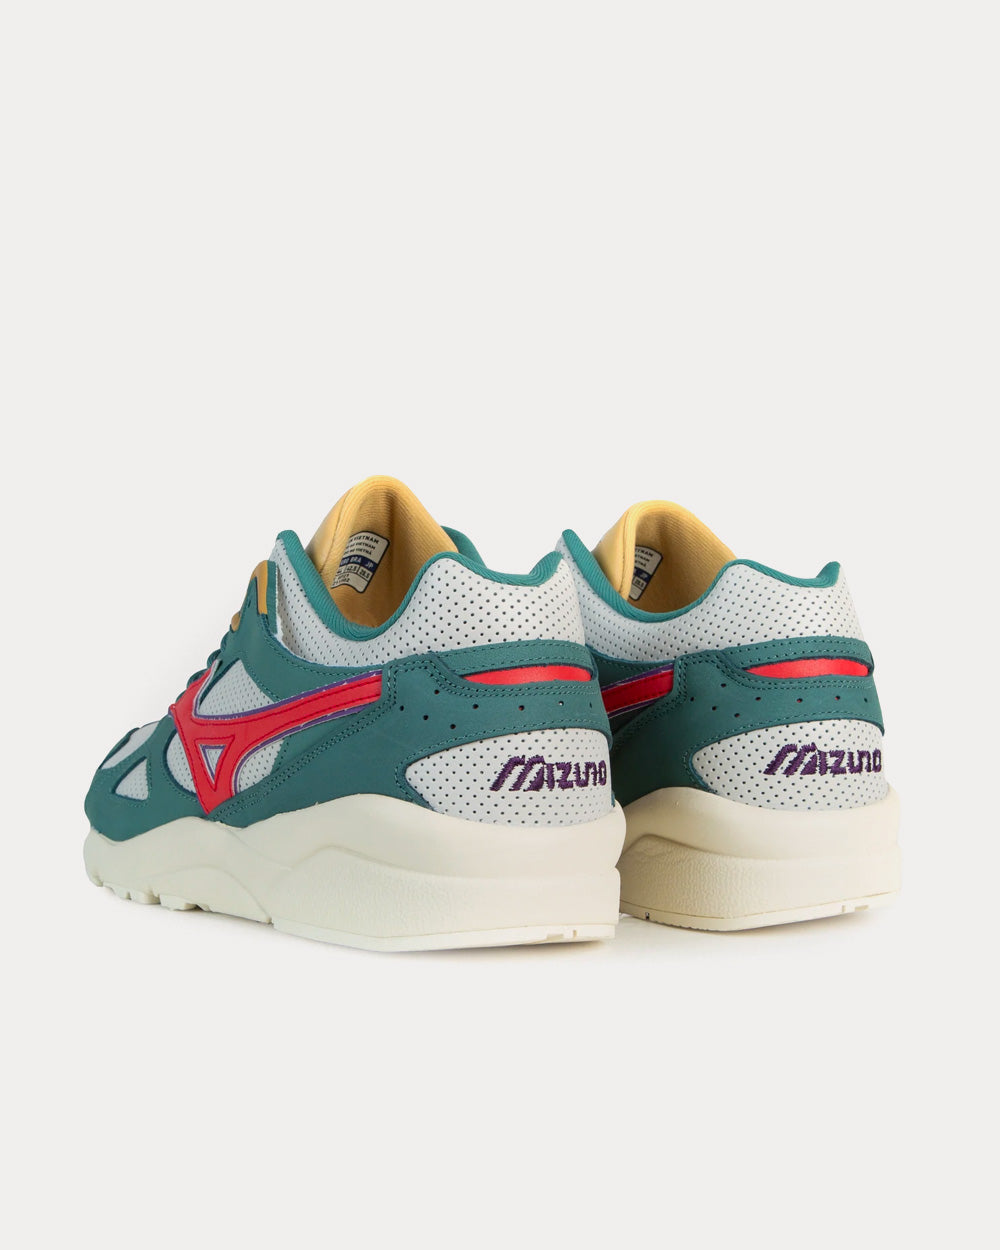 Mizuno x Patta Sky Medal Ivory / Red / Green Low Top Sneakers 